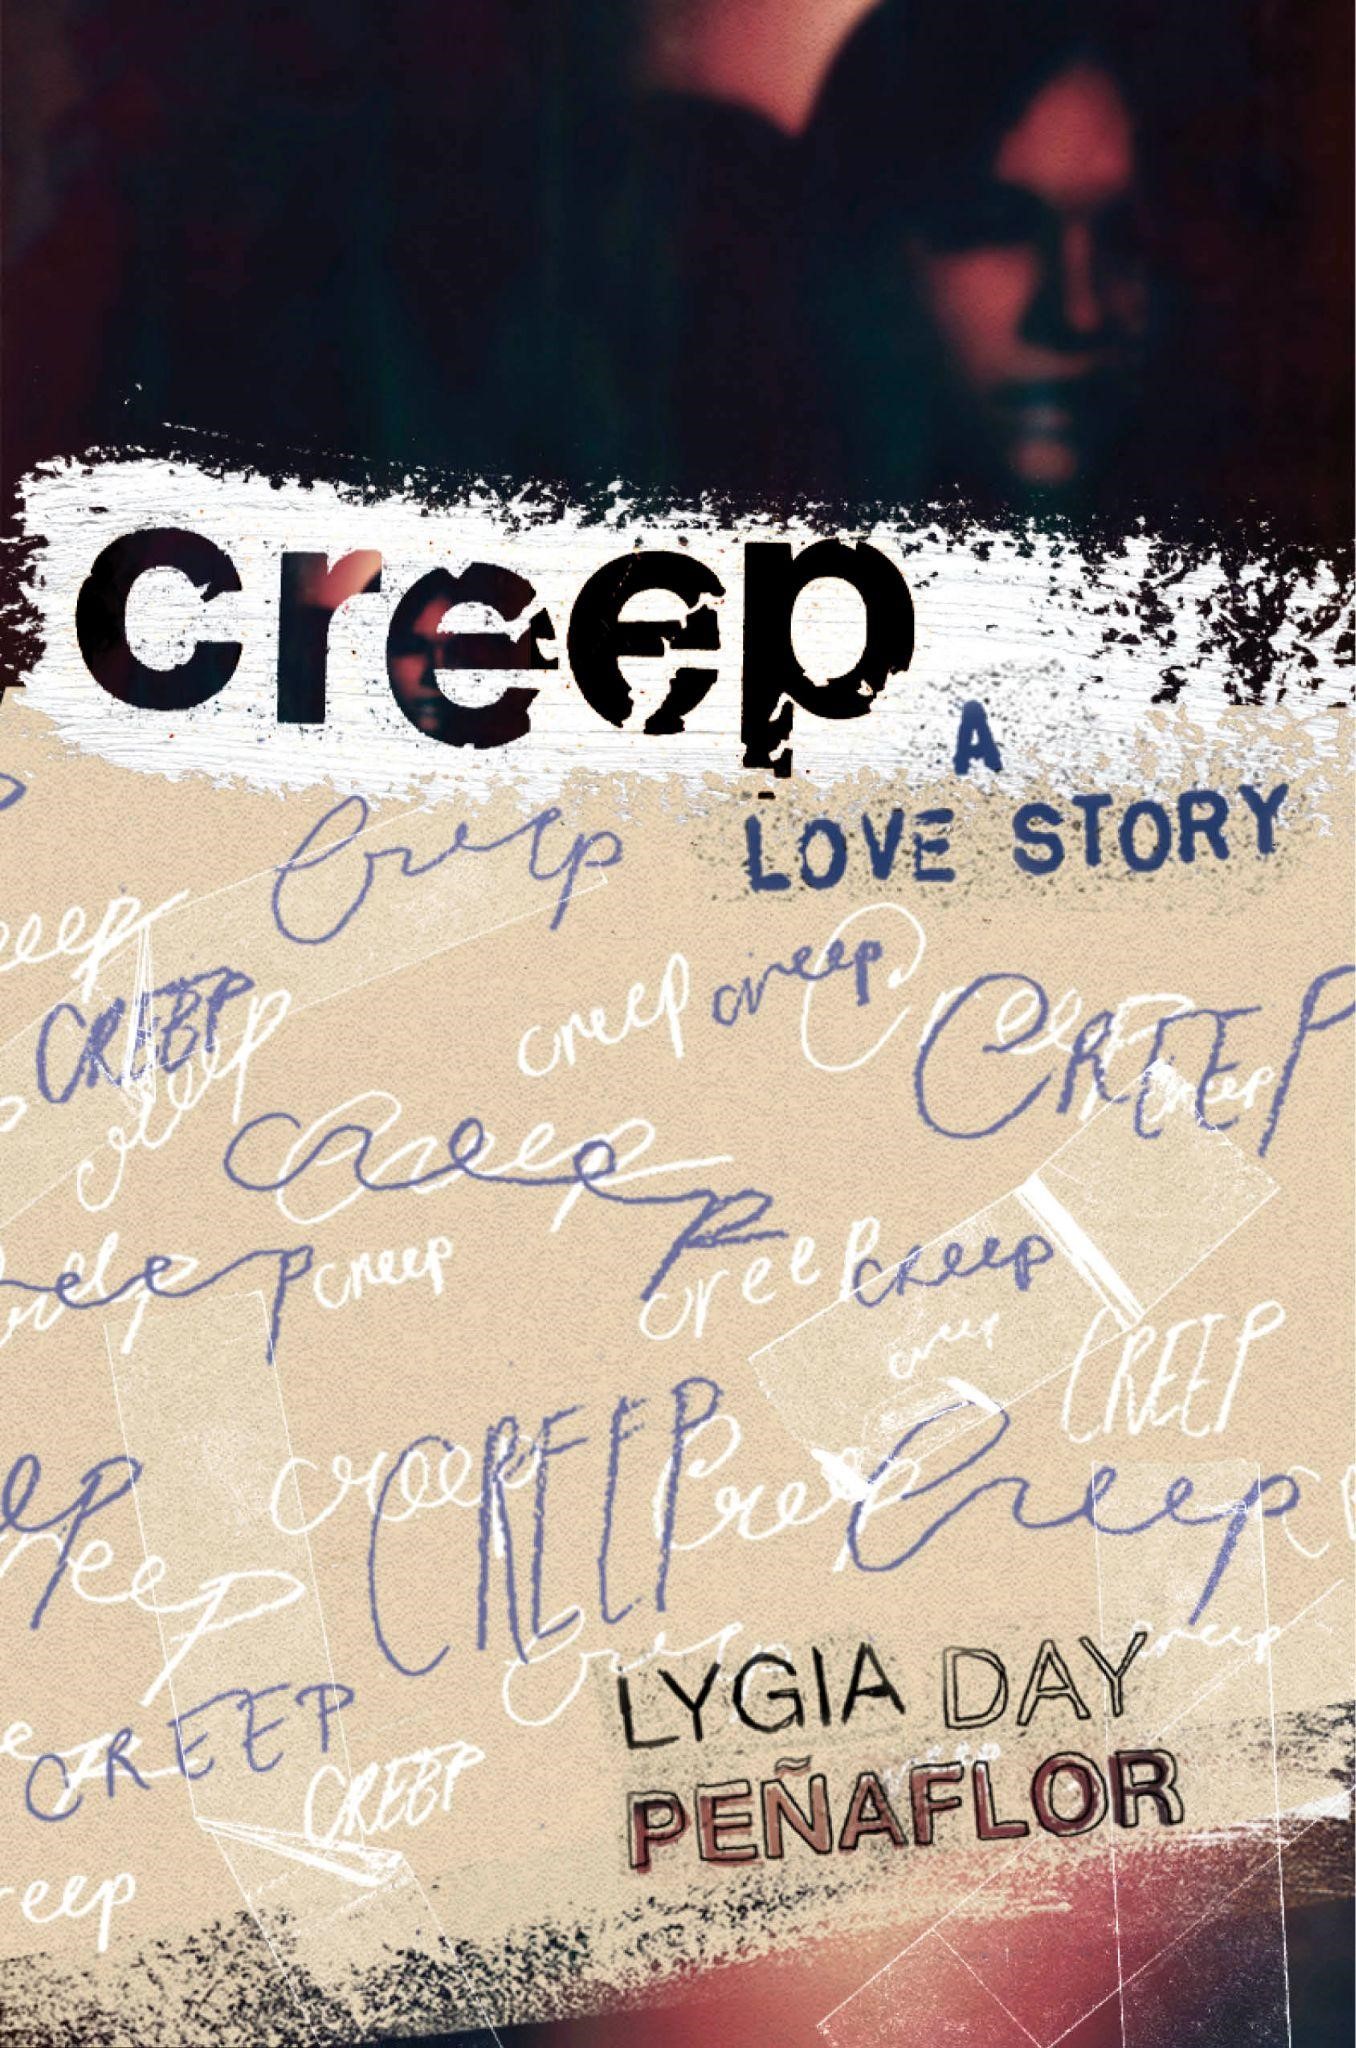 Cranking Up the Creep-factor with Author Lygia Day Peñaflor